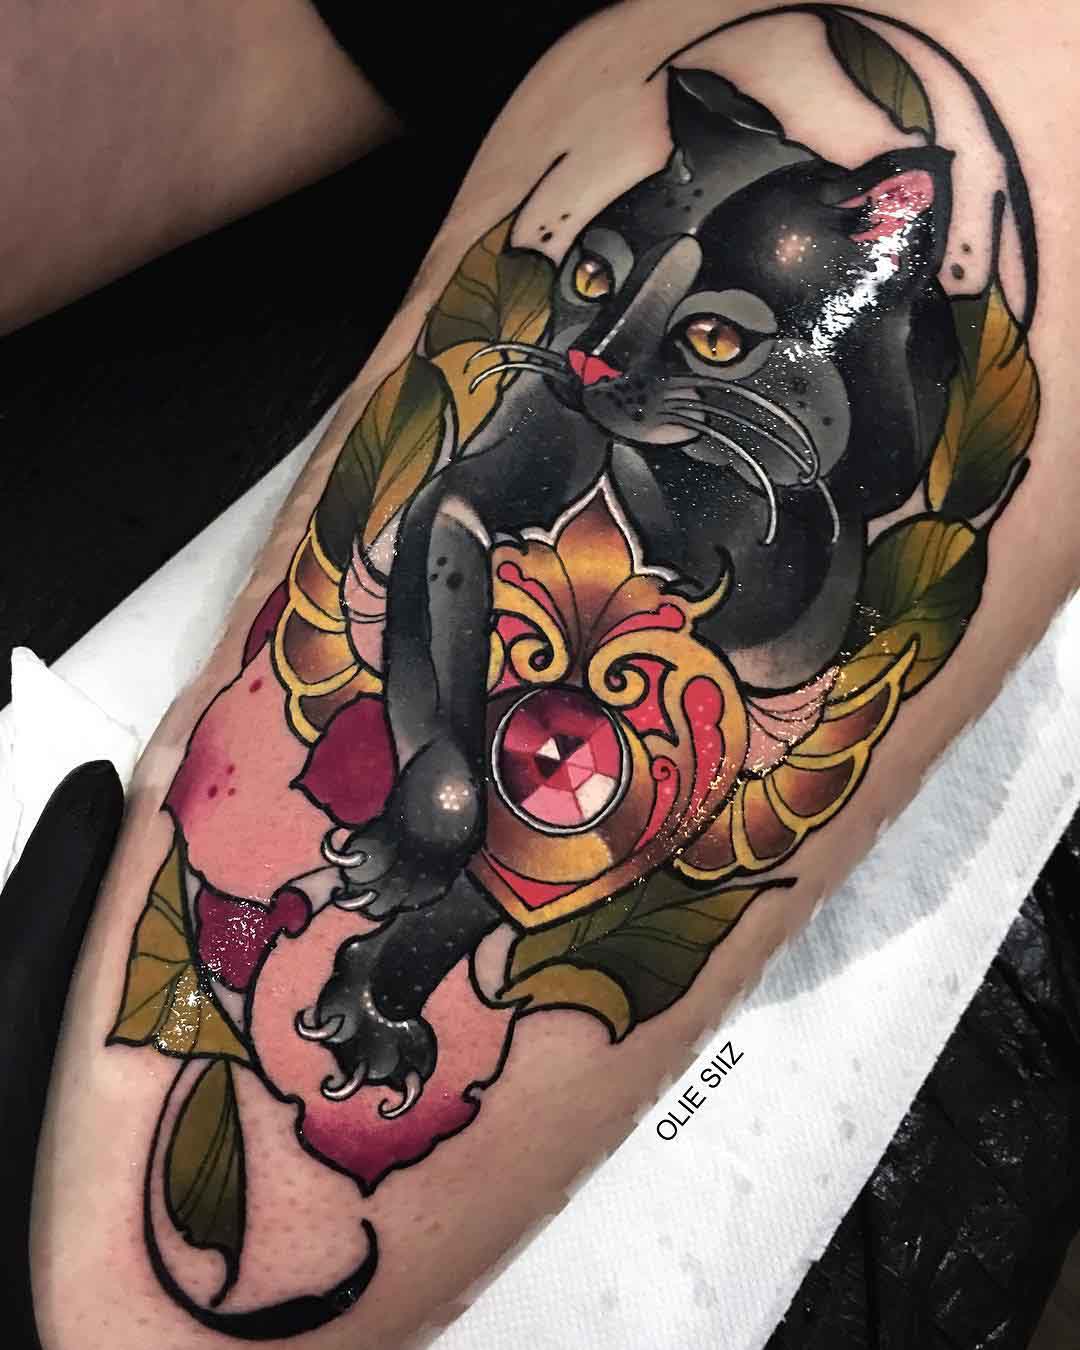 50 Best Black Cat Tattoo Design Ideas Meaning and Inspirations  Saved  Tattoo